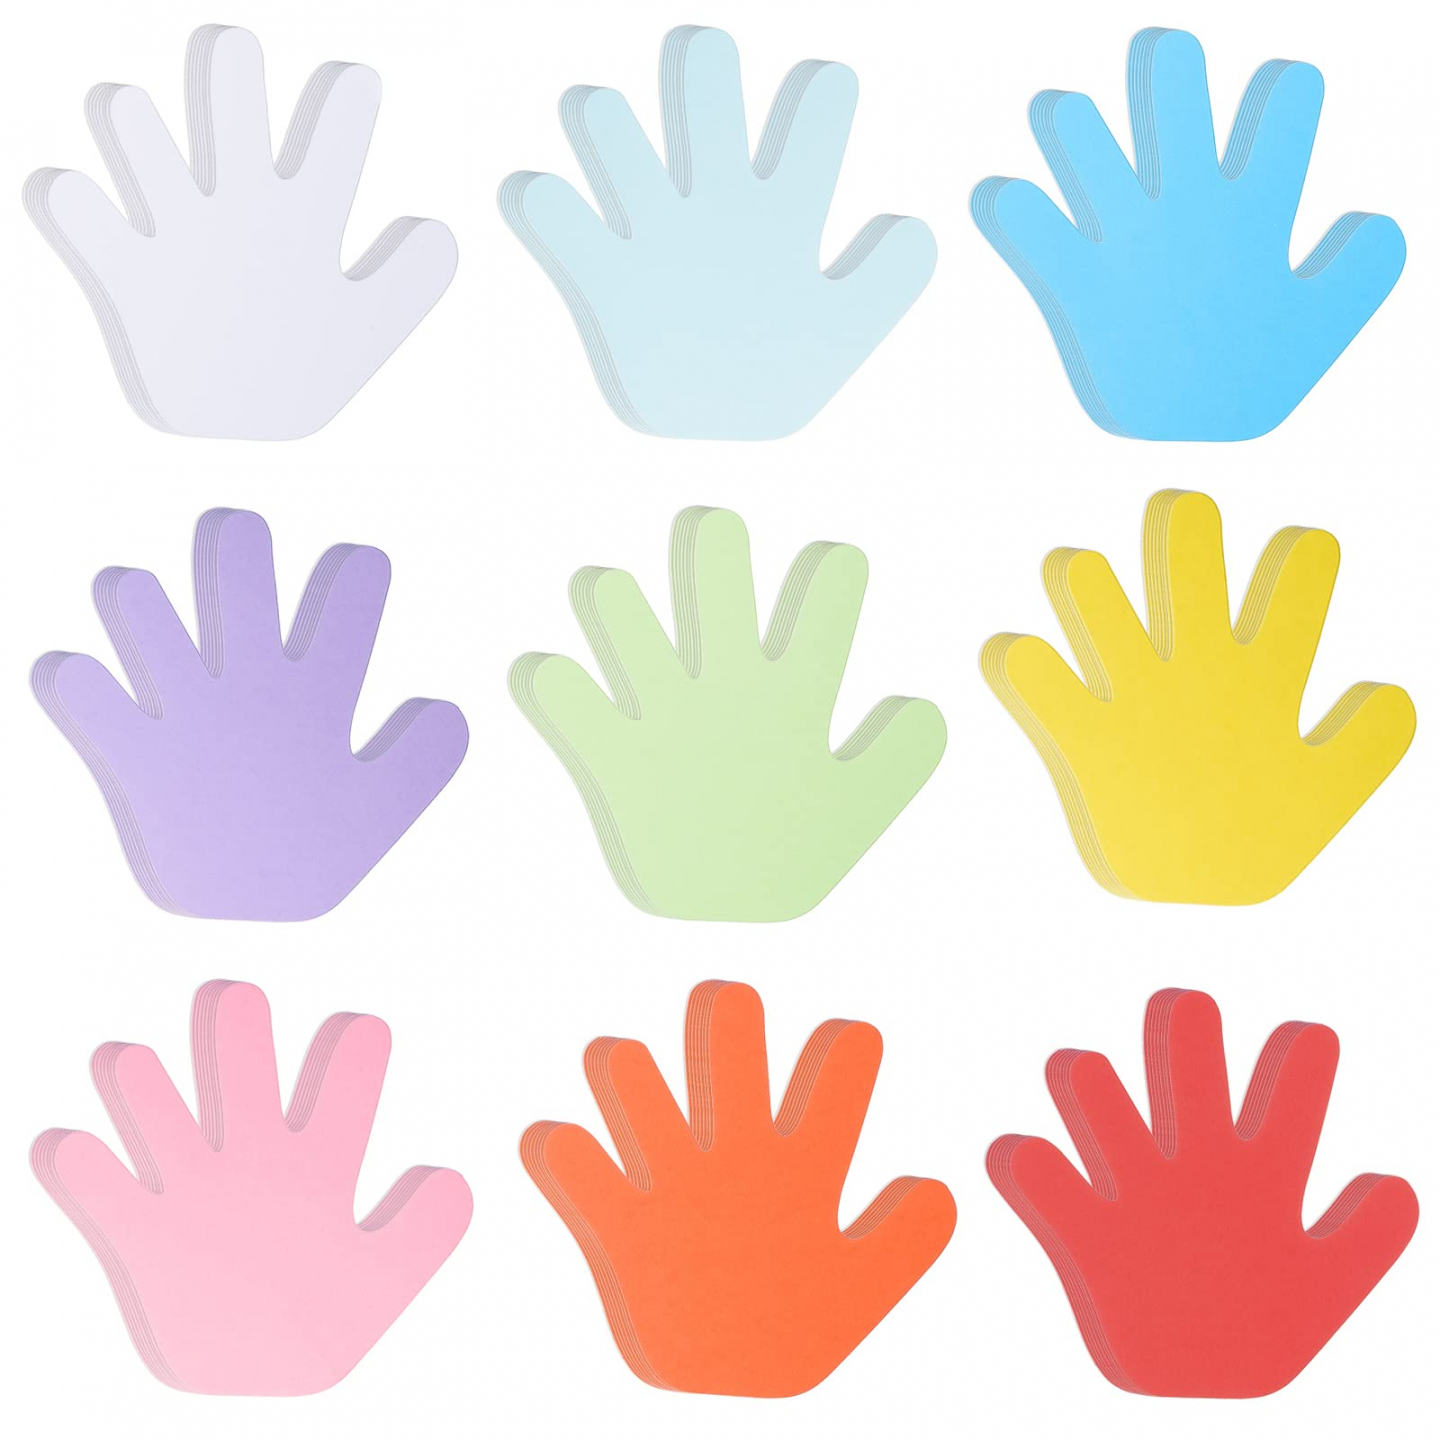 Pieces Hand Cutouts Paper Hand Shape Cut-Outs Assorted Color Handprint  Shape Cutouts Blank Creative Paper Cutouts for Kids DIY Craft Art Project   - FREE Printables - Hand Cut Outs